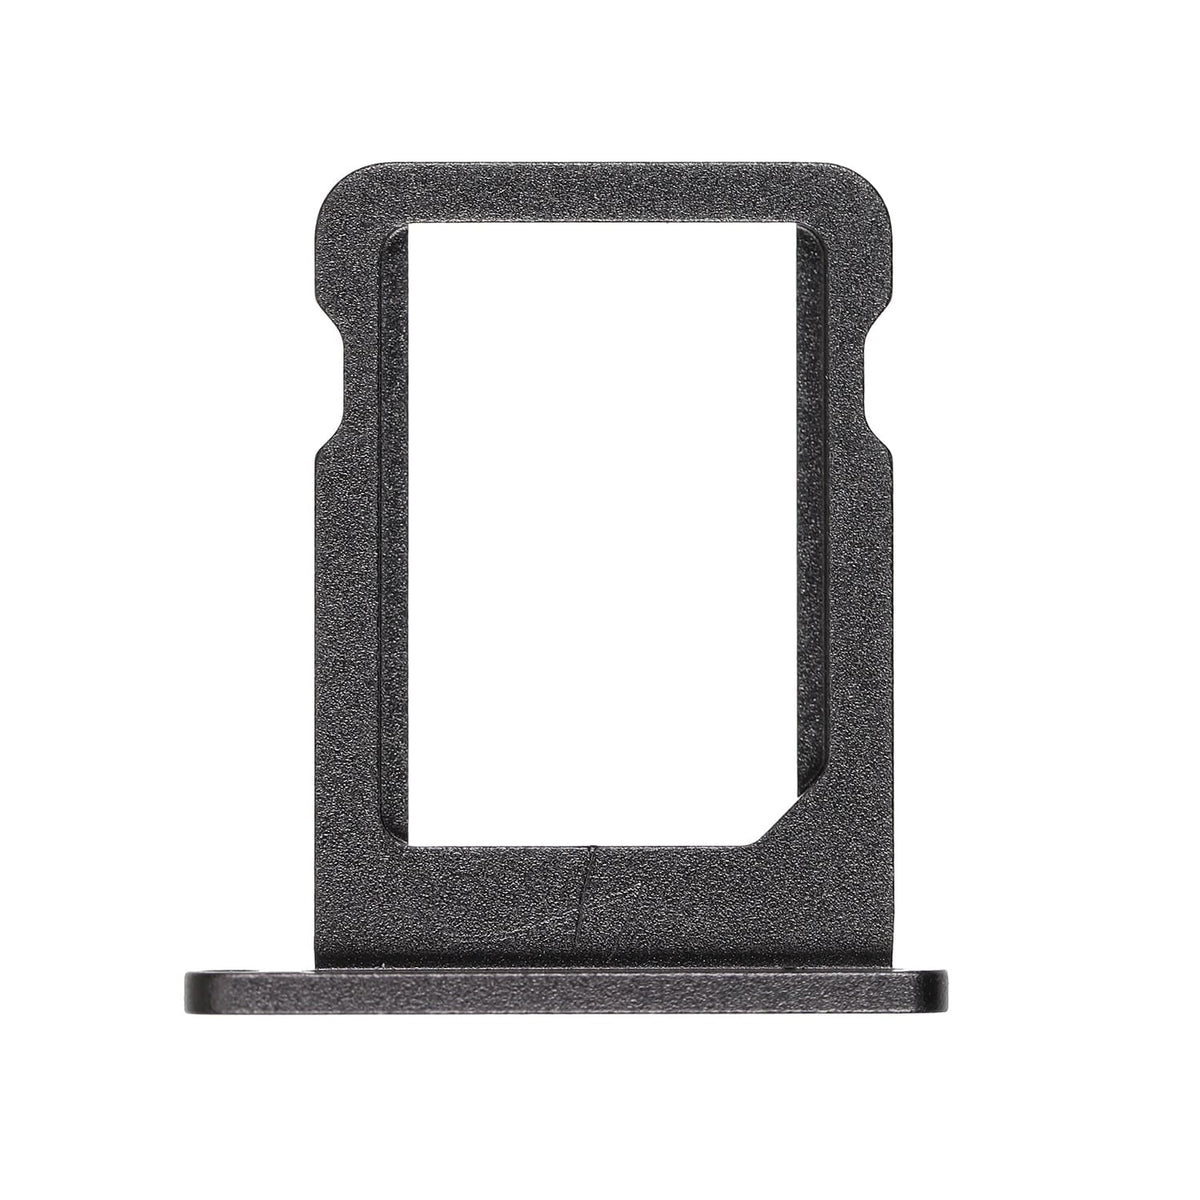 SIM CARD TRAY FOR IPAD PRO 11" 2ND GEN - GRAY